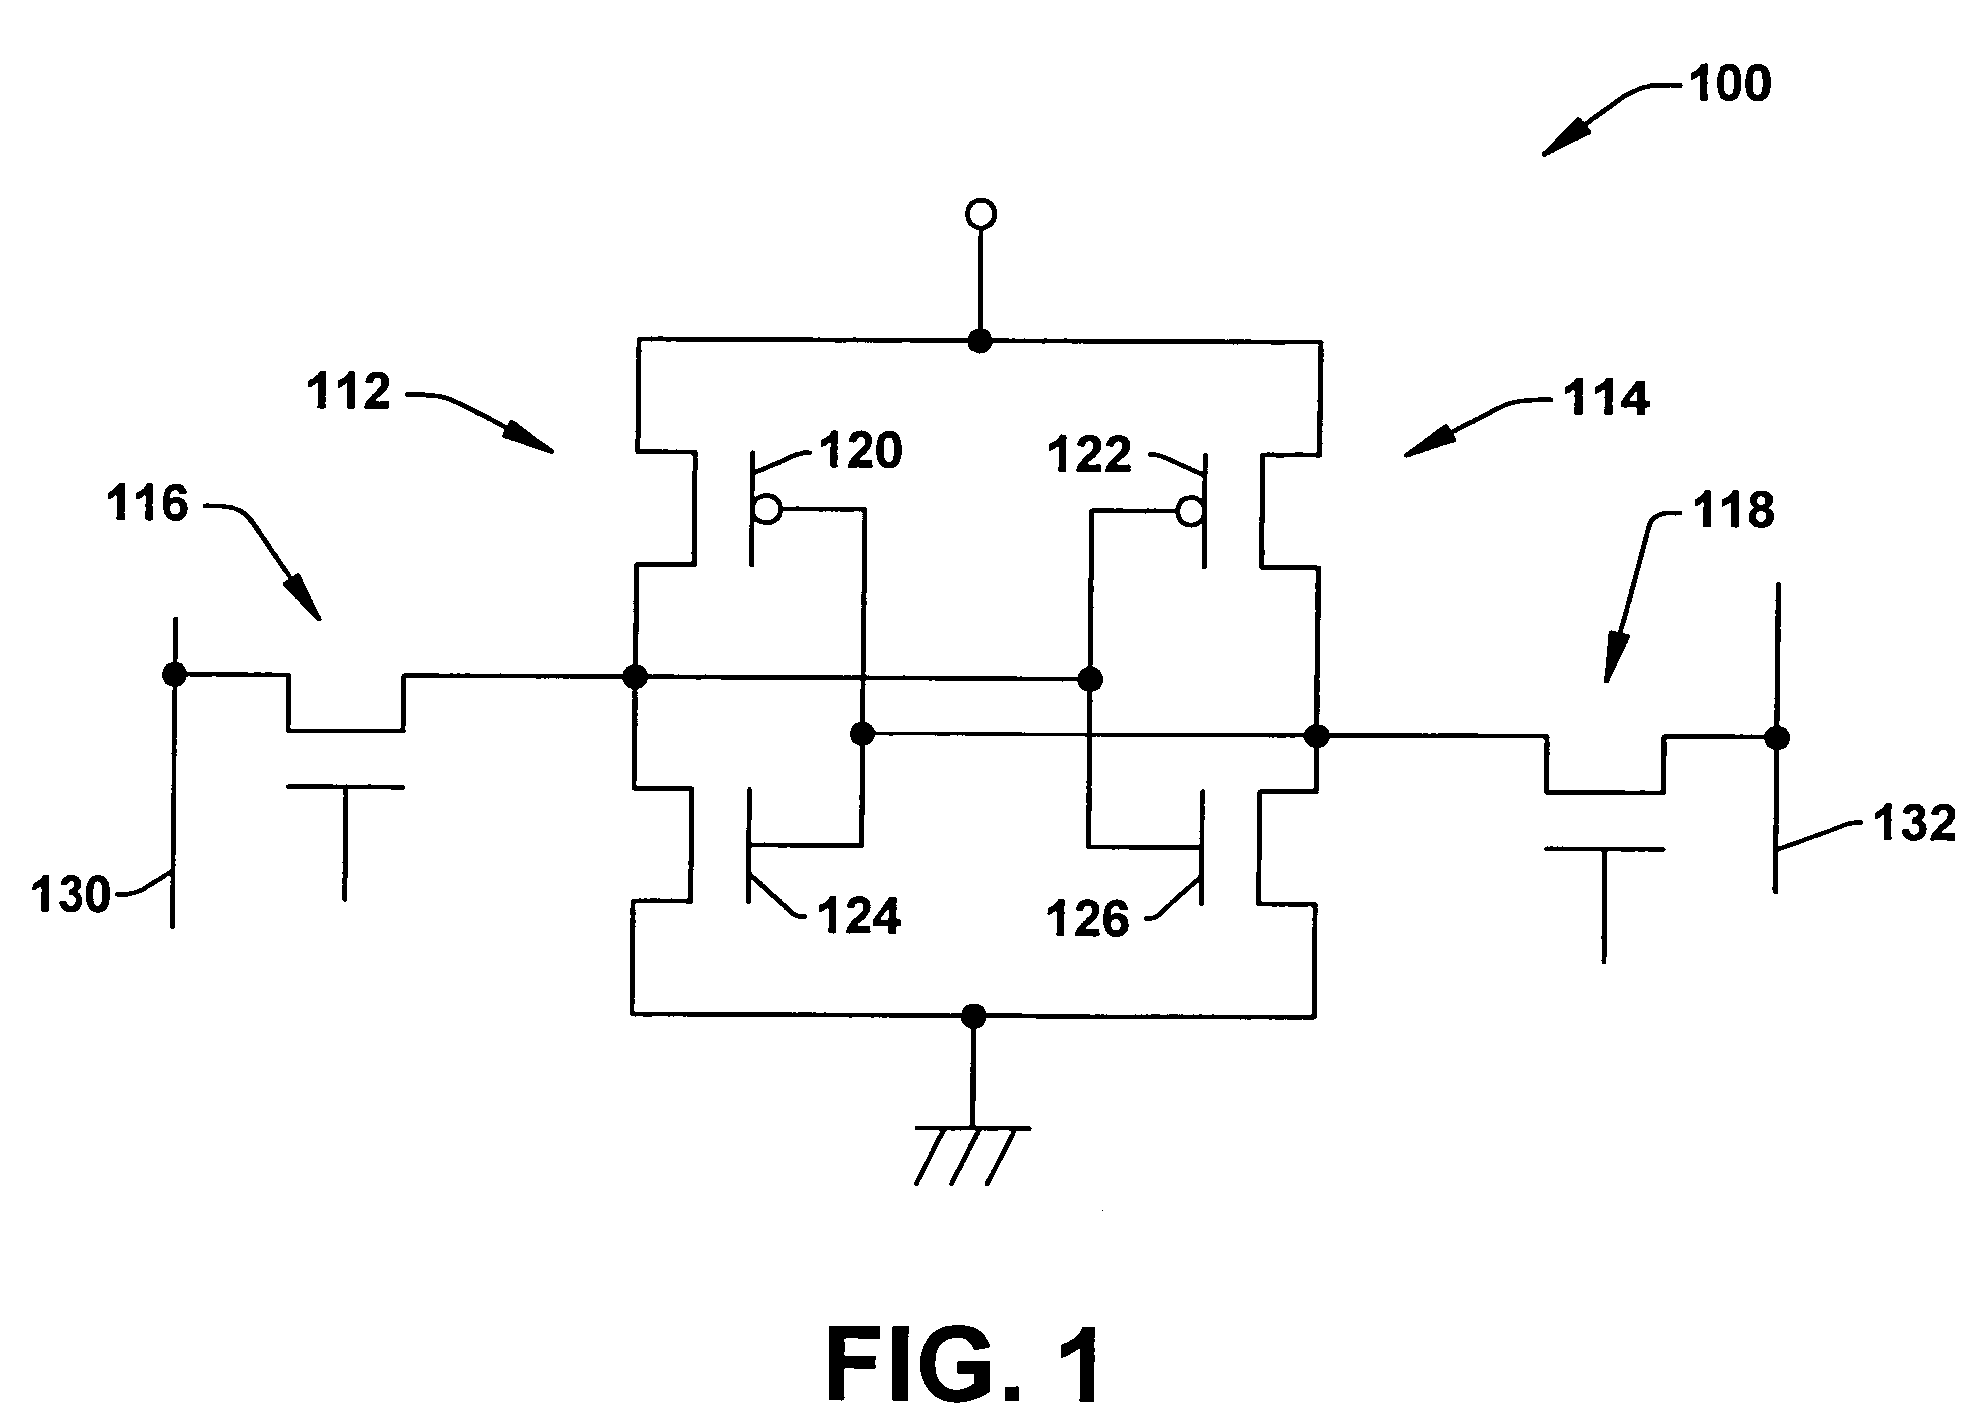 Method for reducing SRAM test time by applying power-up state knowledge